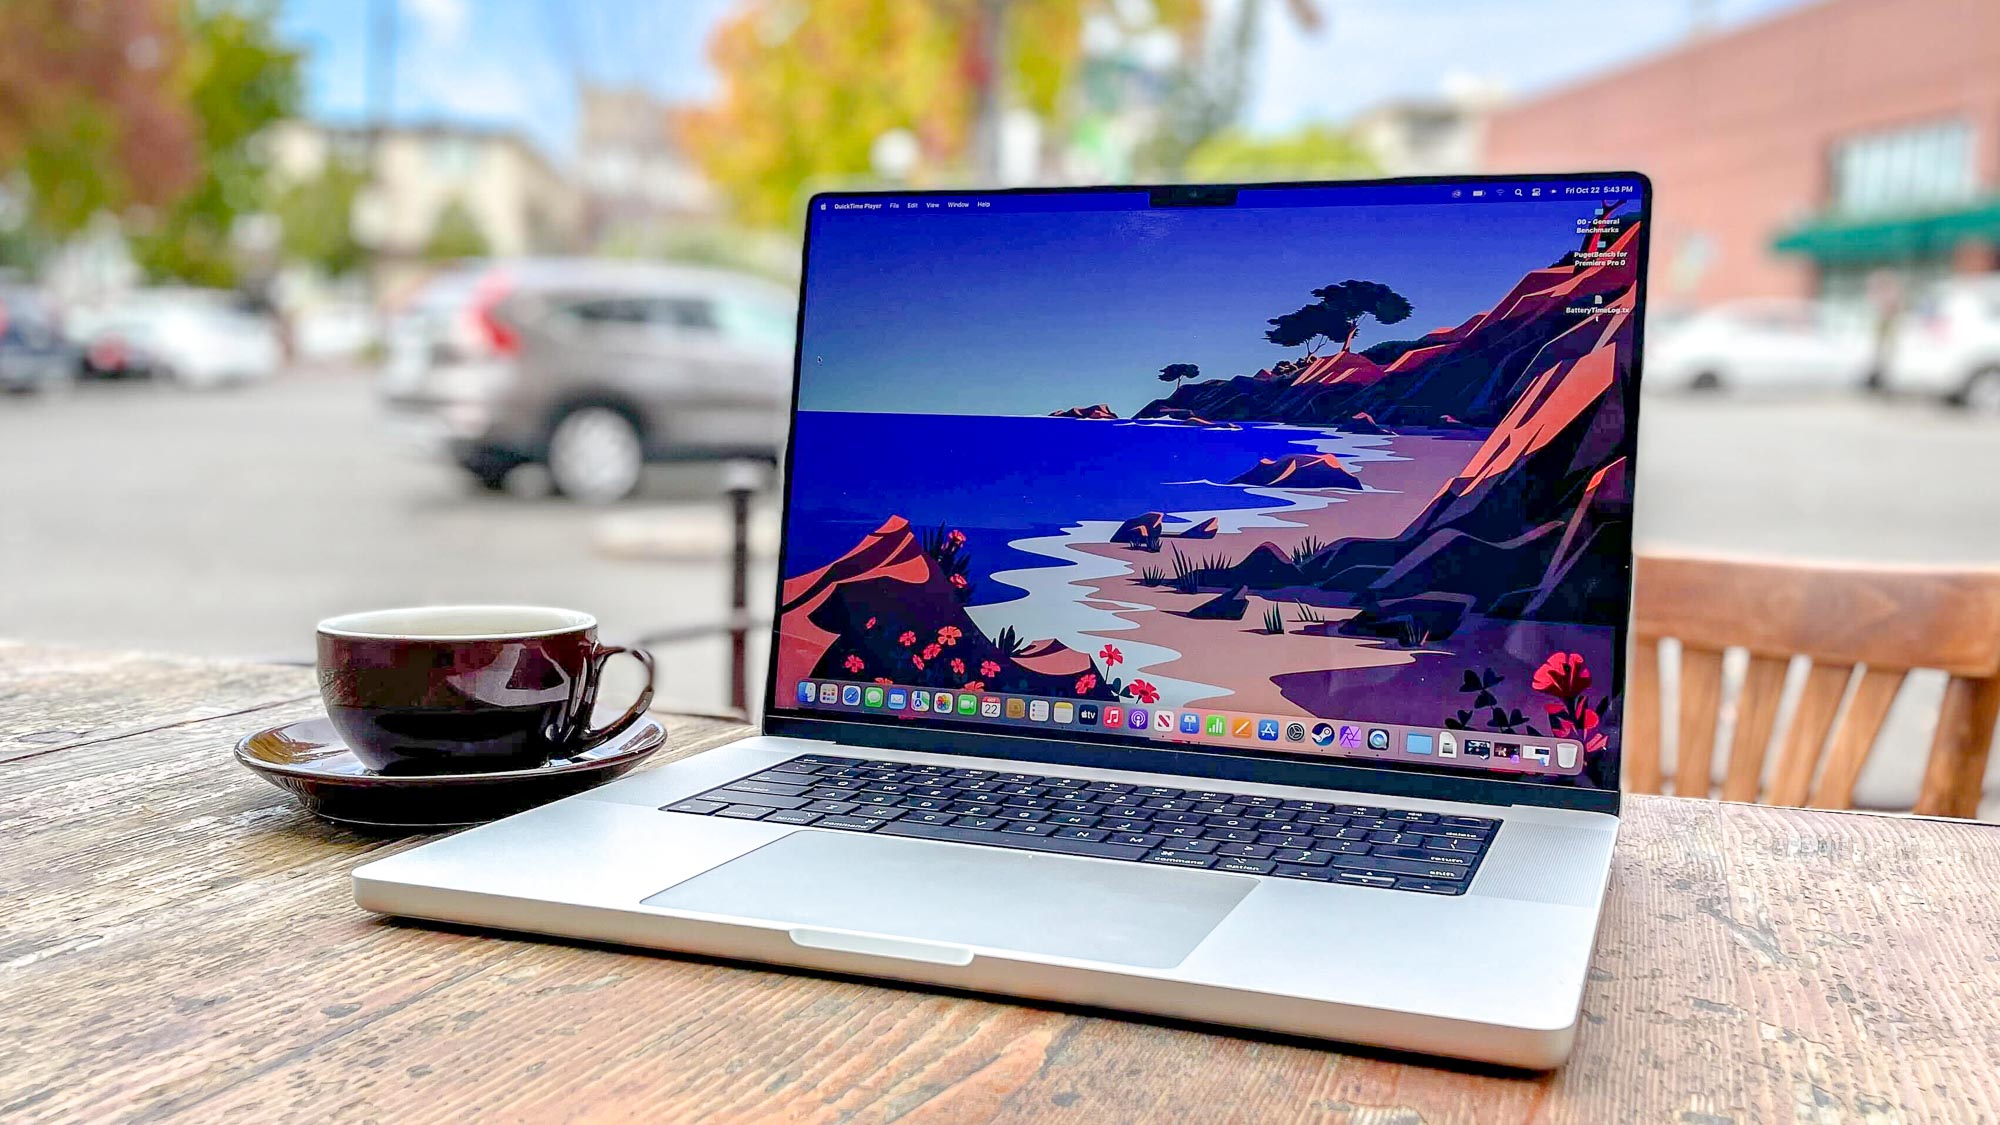 New MacBook Pro M2 models just tipped for early 2023 launch